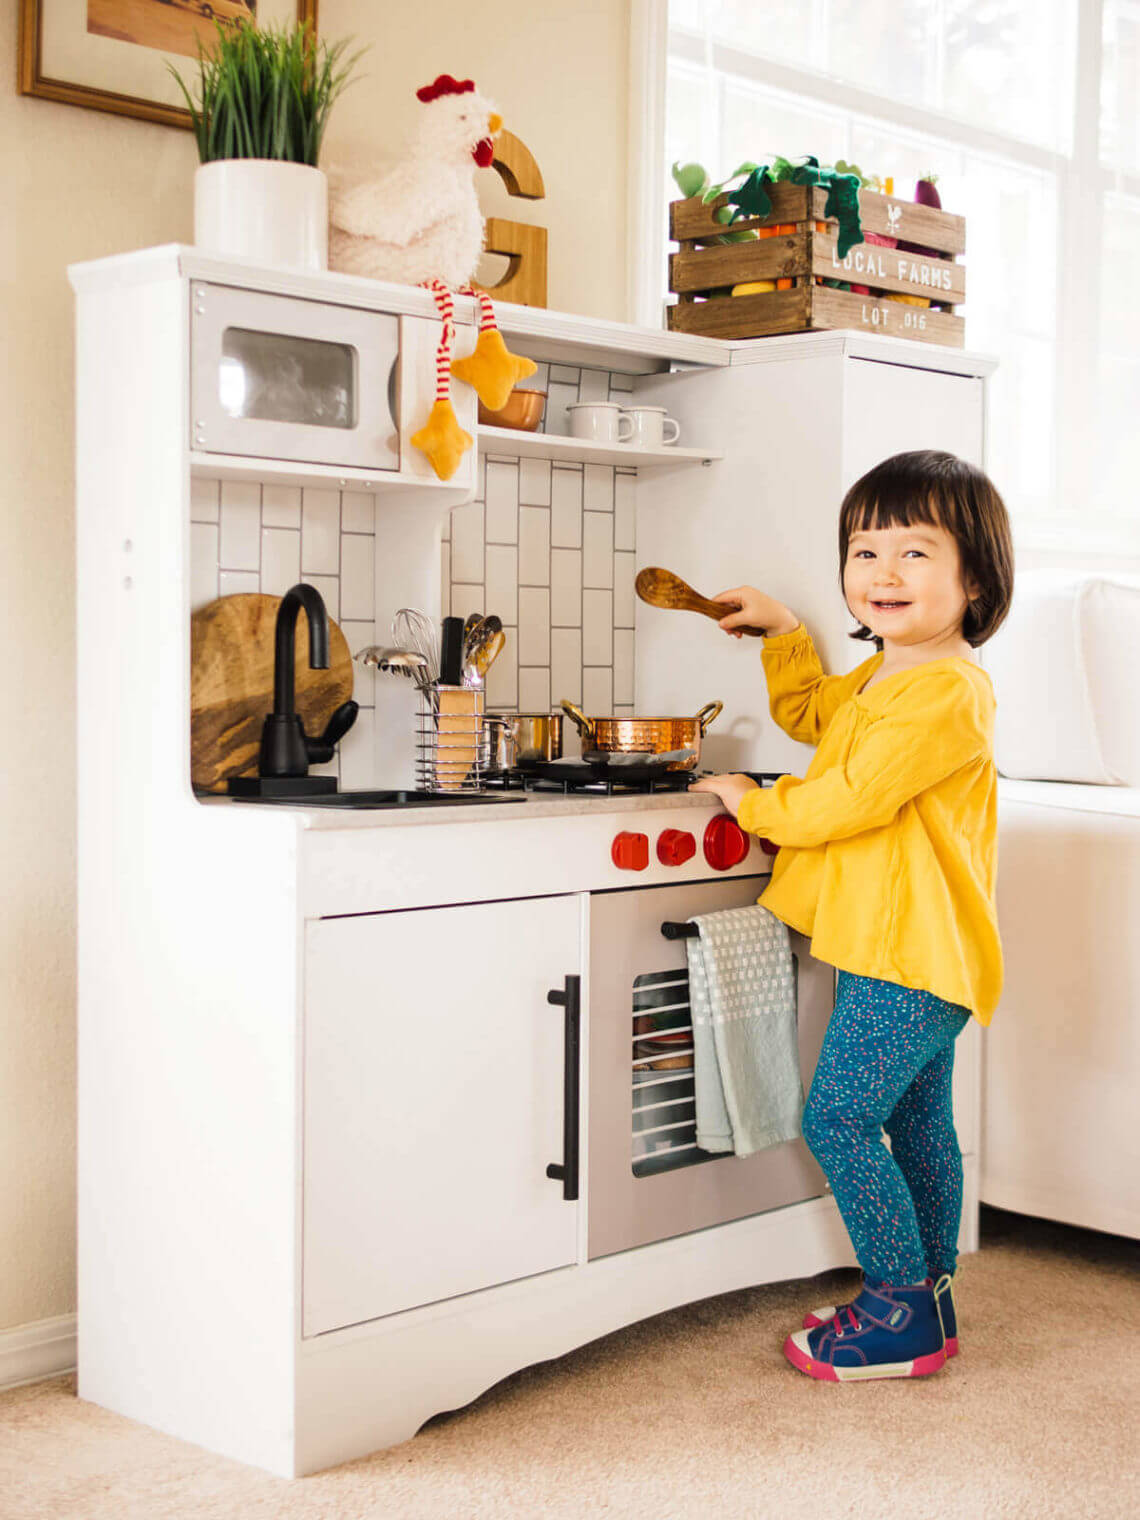 A play kitchen makeover